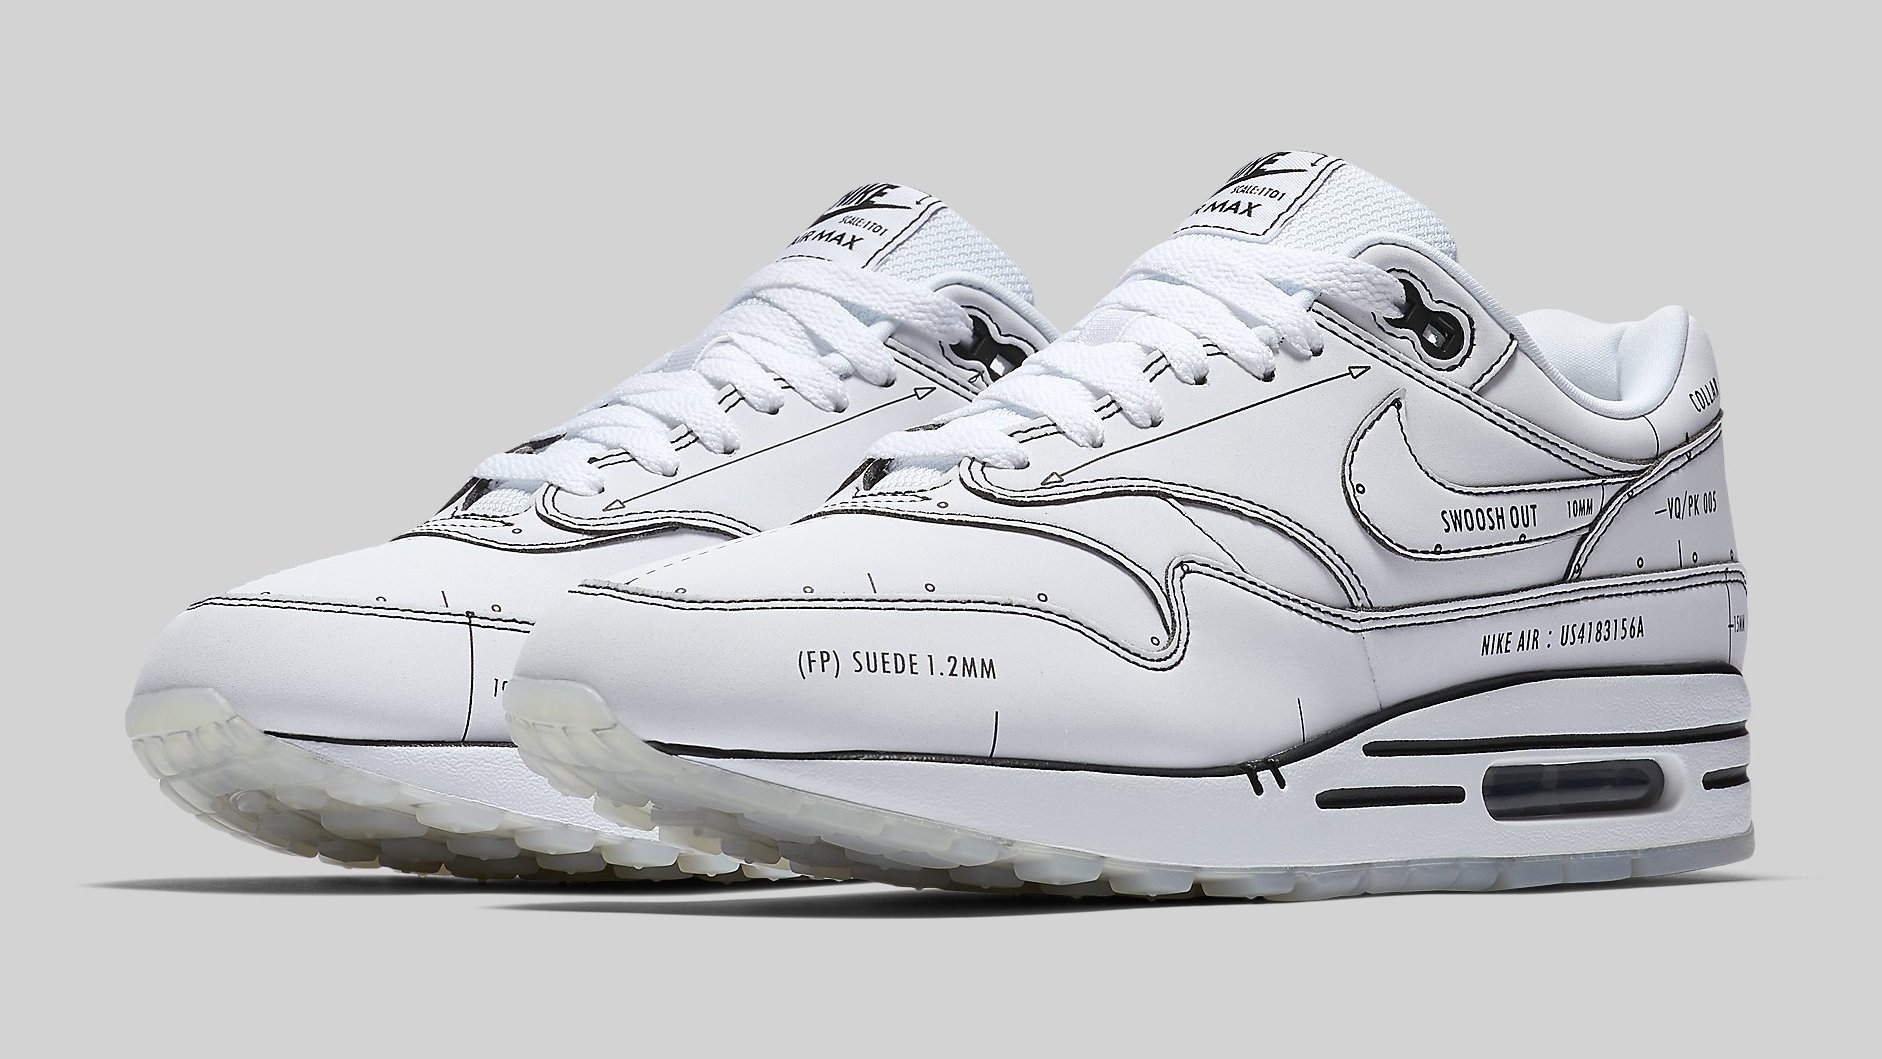 Nike Air Max 1 'Schematic Not For Resale' Release Date August 9, 2019 | Collector